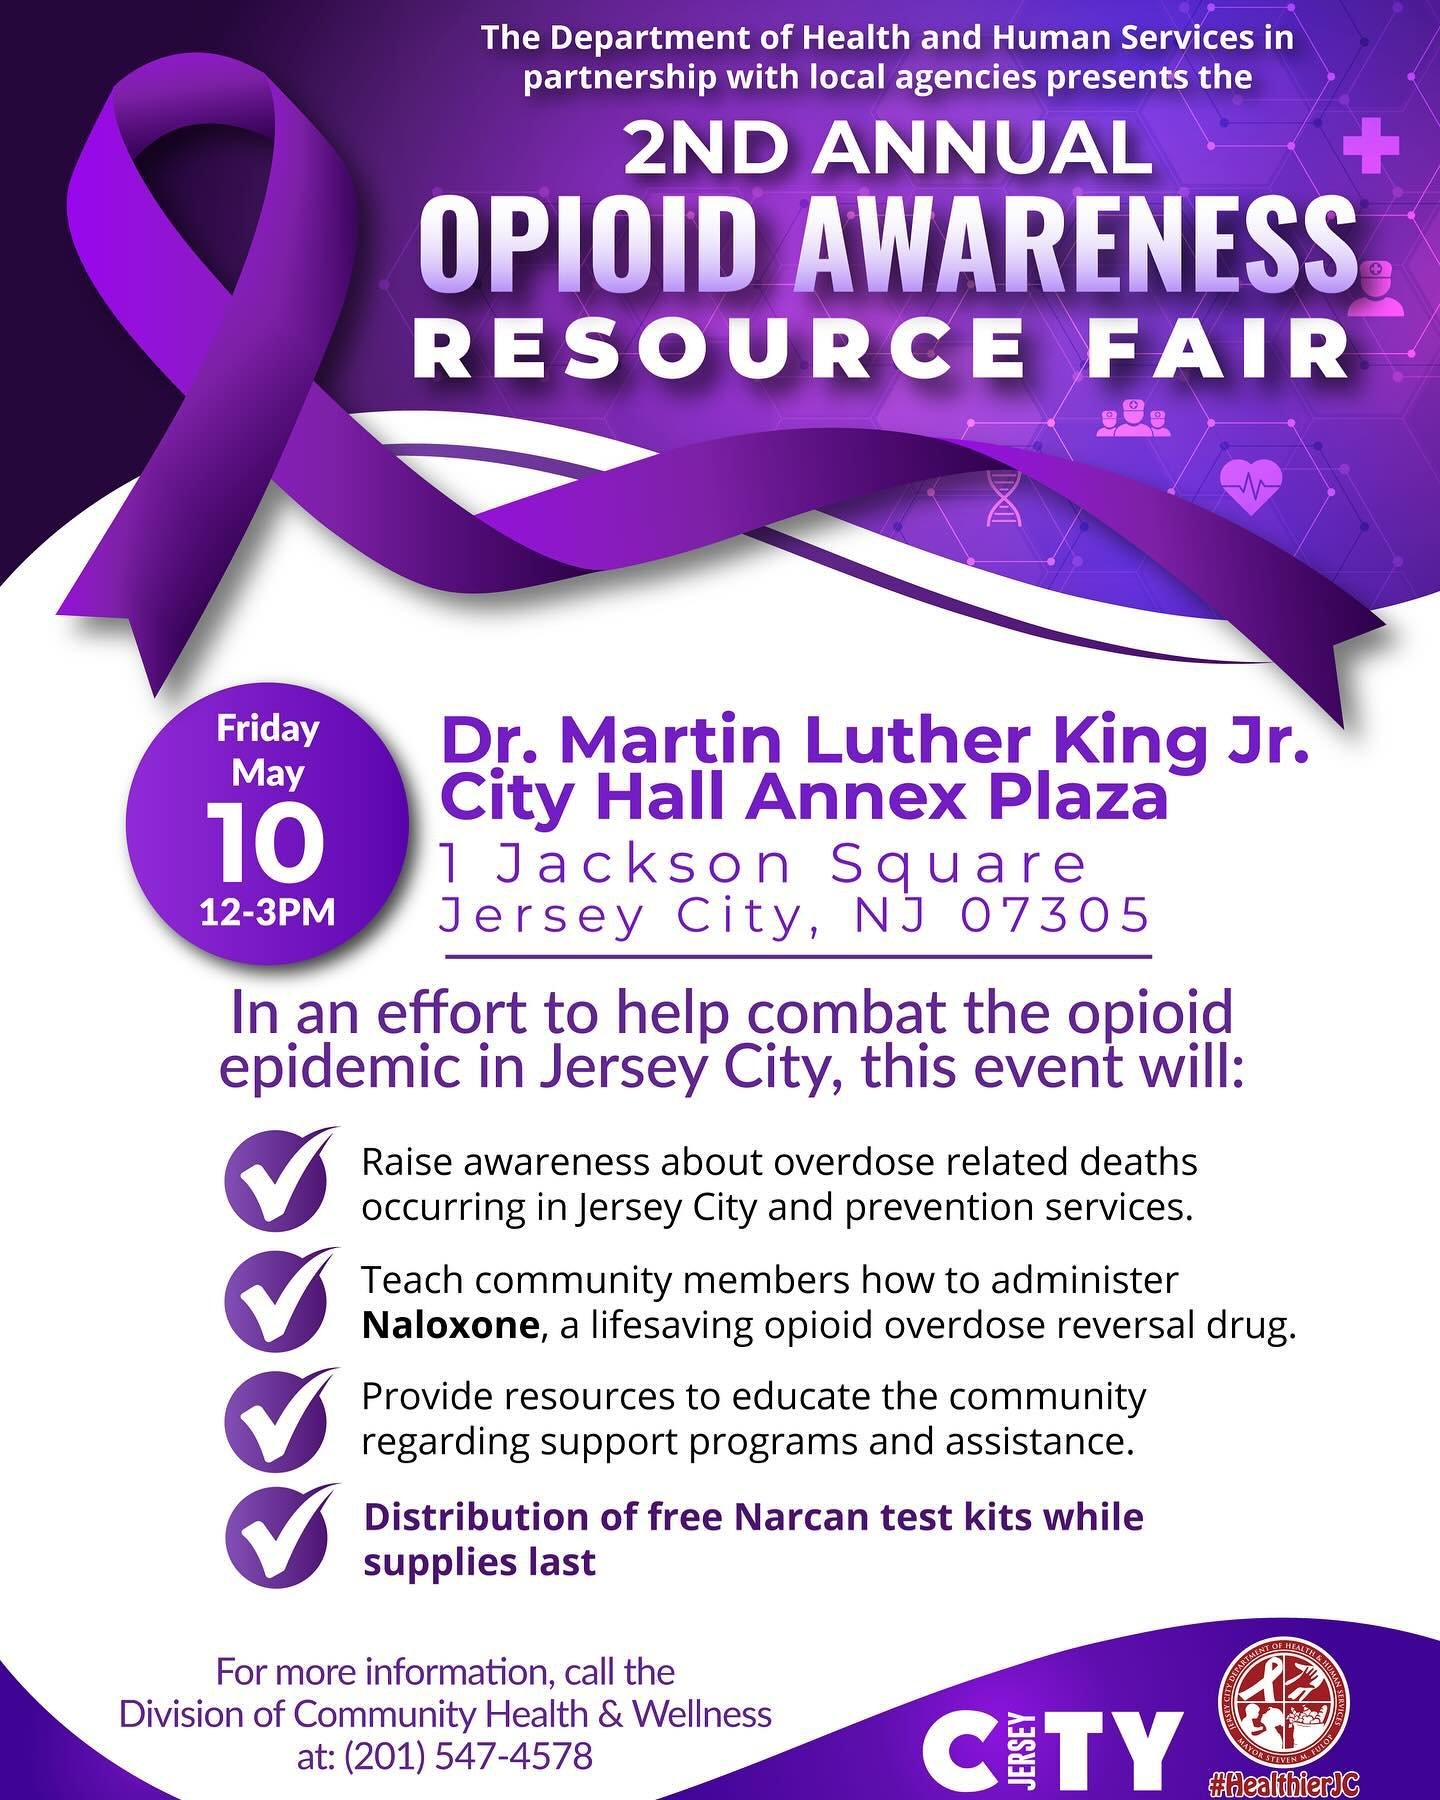 To help combat the opioid epidemic in Jersey City, Jersey City&rsquo;s Division of Community Health and Wellness is hosting their 2nd Annual Opioid Awareness Resource Fair! Join us to raise awareness and receive a free Narcan kit while supplies last.